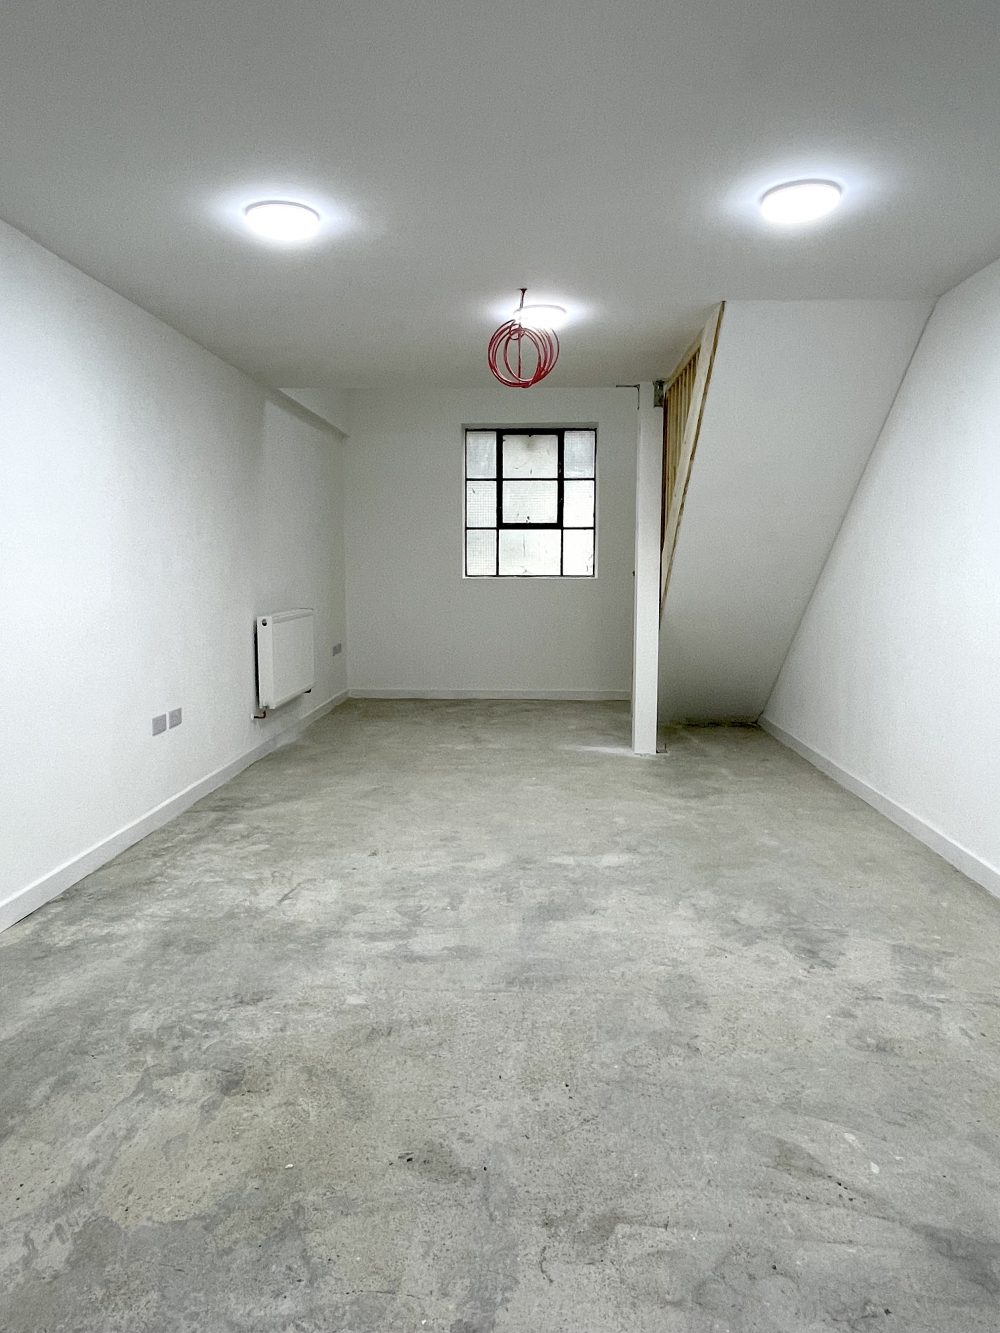 Creative live work style Studio flat Available to rent in EN3 Enfield Alxandra rd Pic4